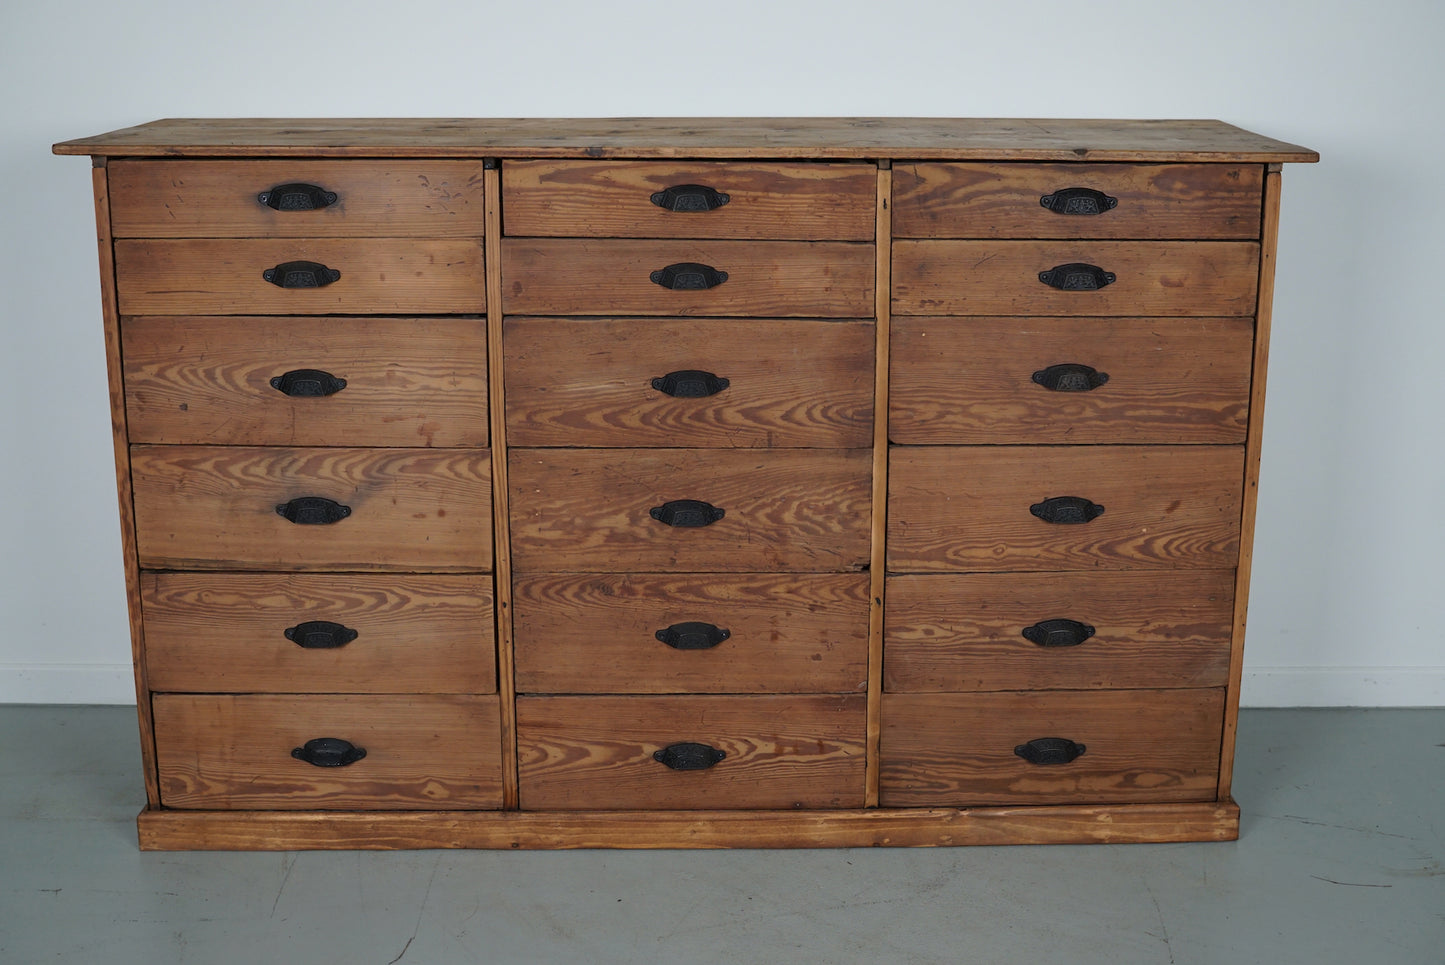 Antique Rustic German Pine Apothecary Cabinet / Bank of Drawers, 1900s